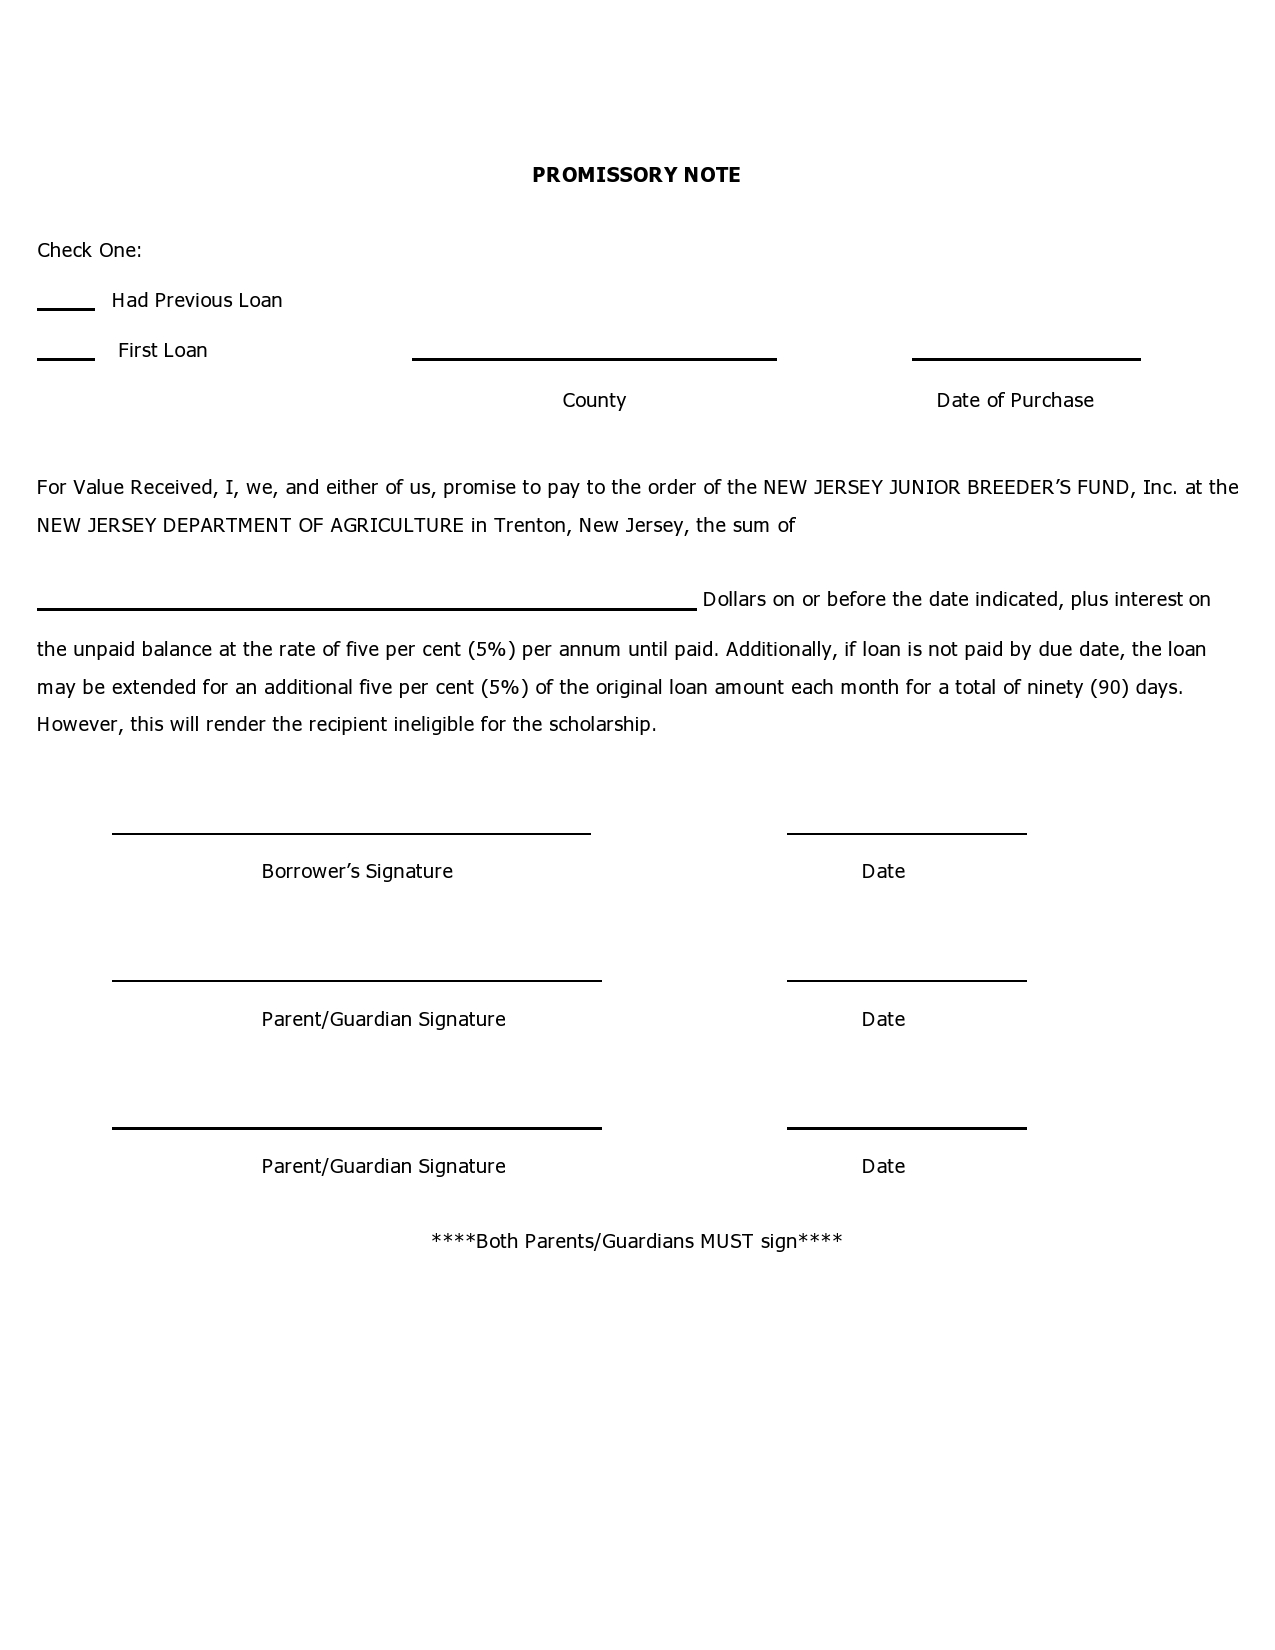 Free promissory note template 11